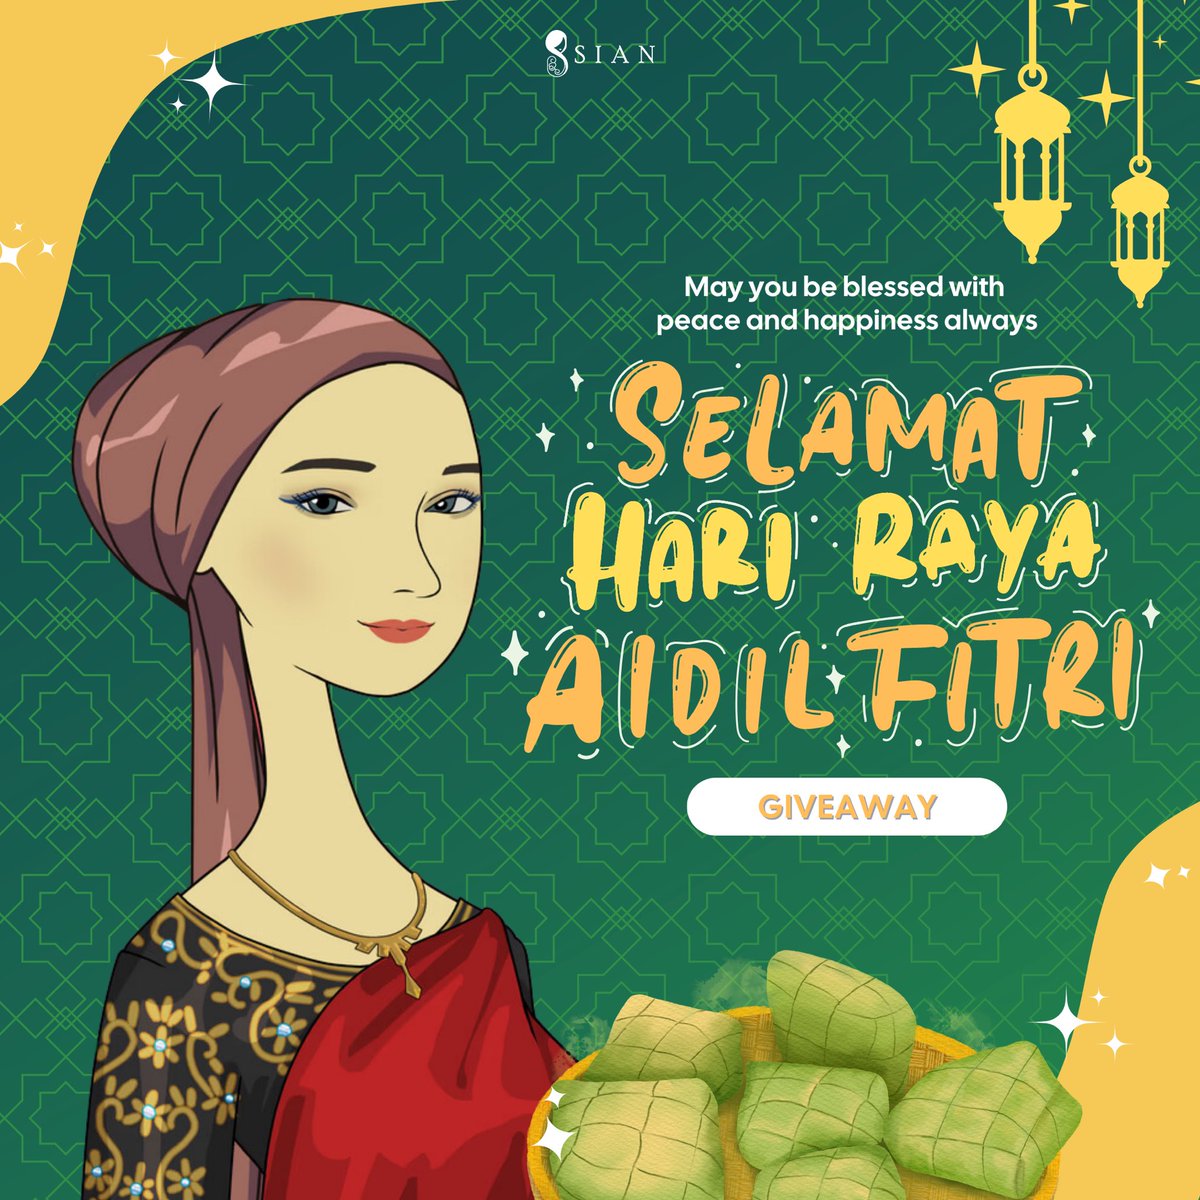 🎁🌙 #NFTGiveaway🌙🎁

To those celebrating, Have an amazing Eid, filled with joy and prosperity! ✨⭐️

#HariRayaAidilfitri is an annually celebrated festival marking the end of the month of Muslim fasting, also defined as Ramadan.

💚Like & RT
💚Tag 3 frens
⏳Picking in 72 hours